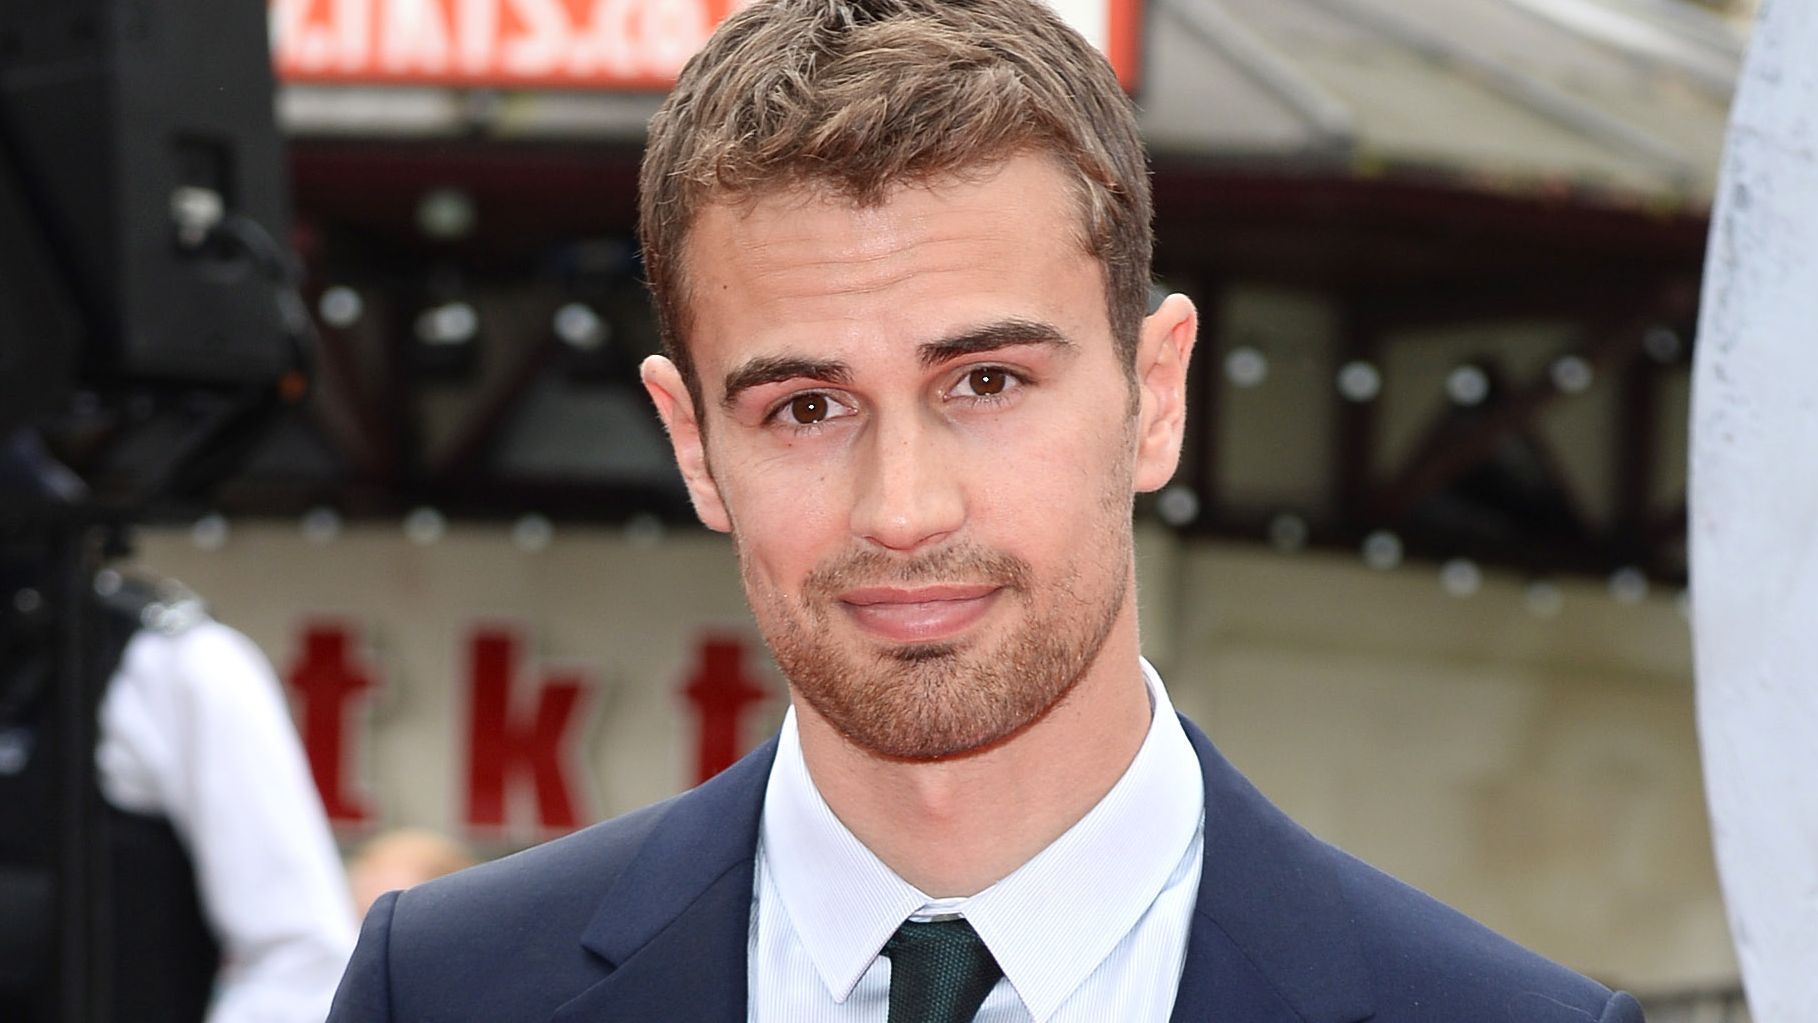 Theo launched his own film production company Untapped in 2019